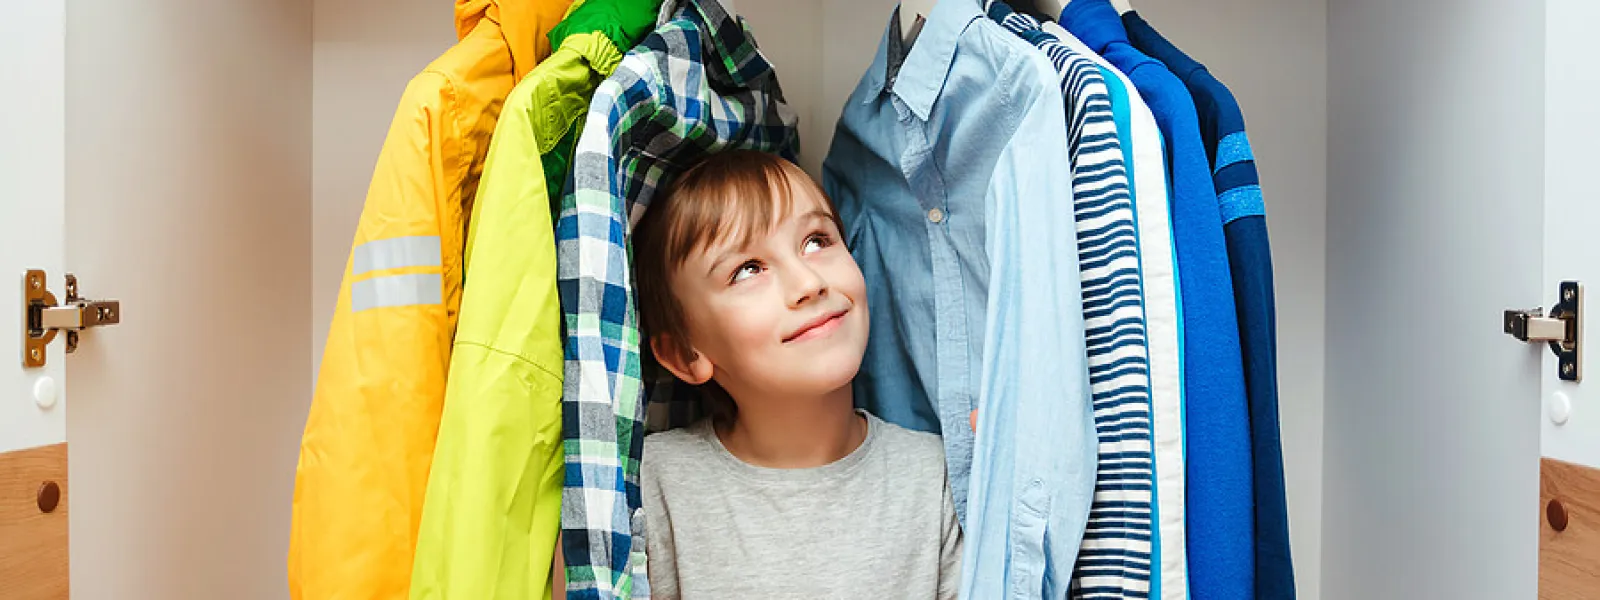 a boy standing in front of a rack of clothes